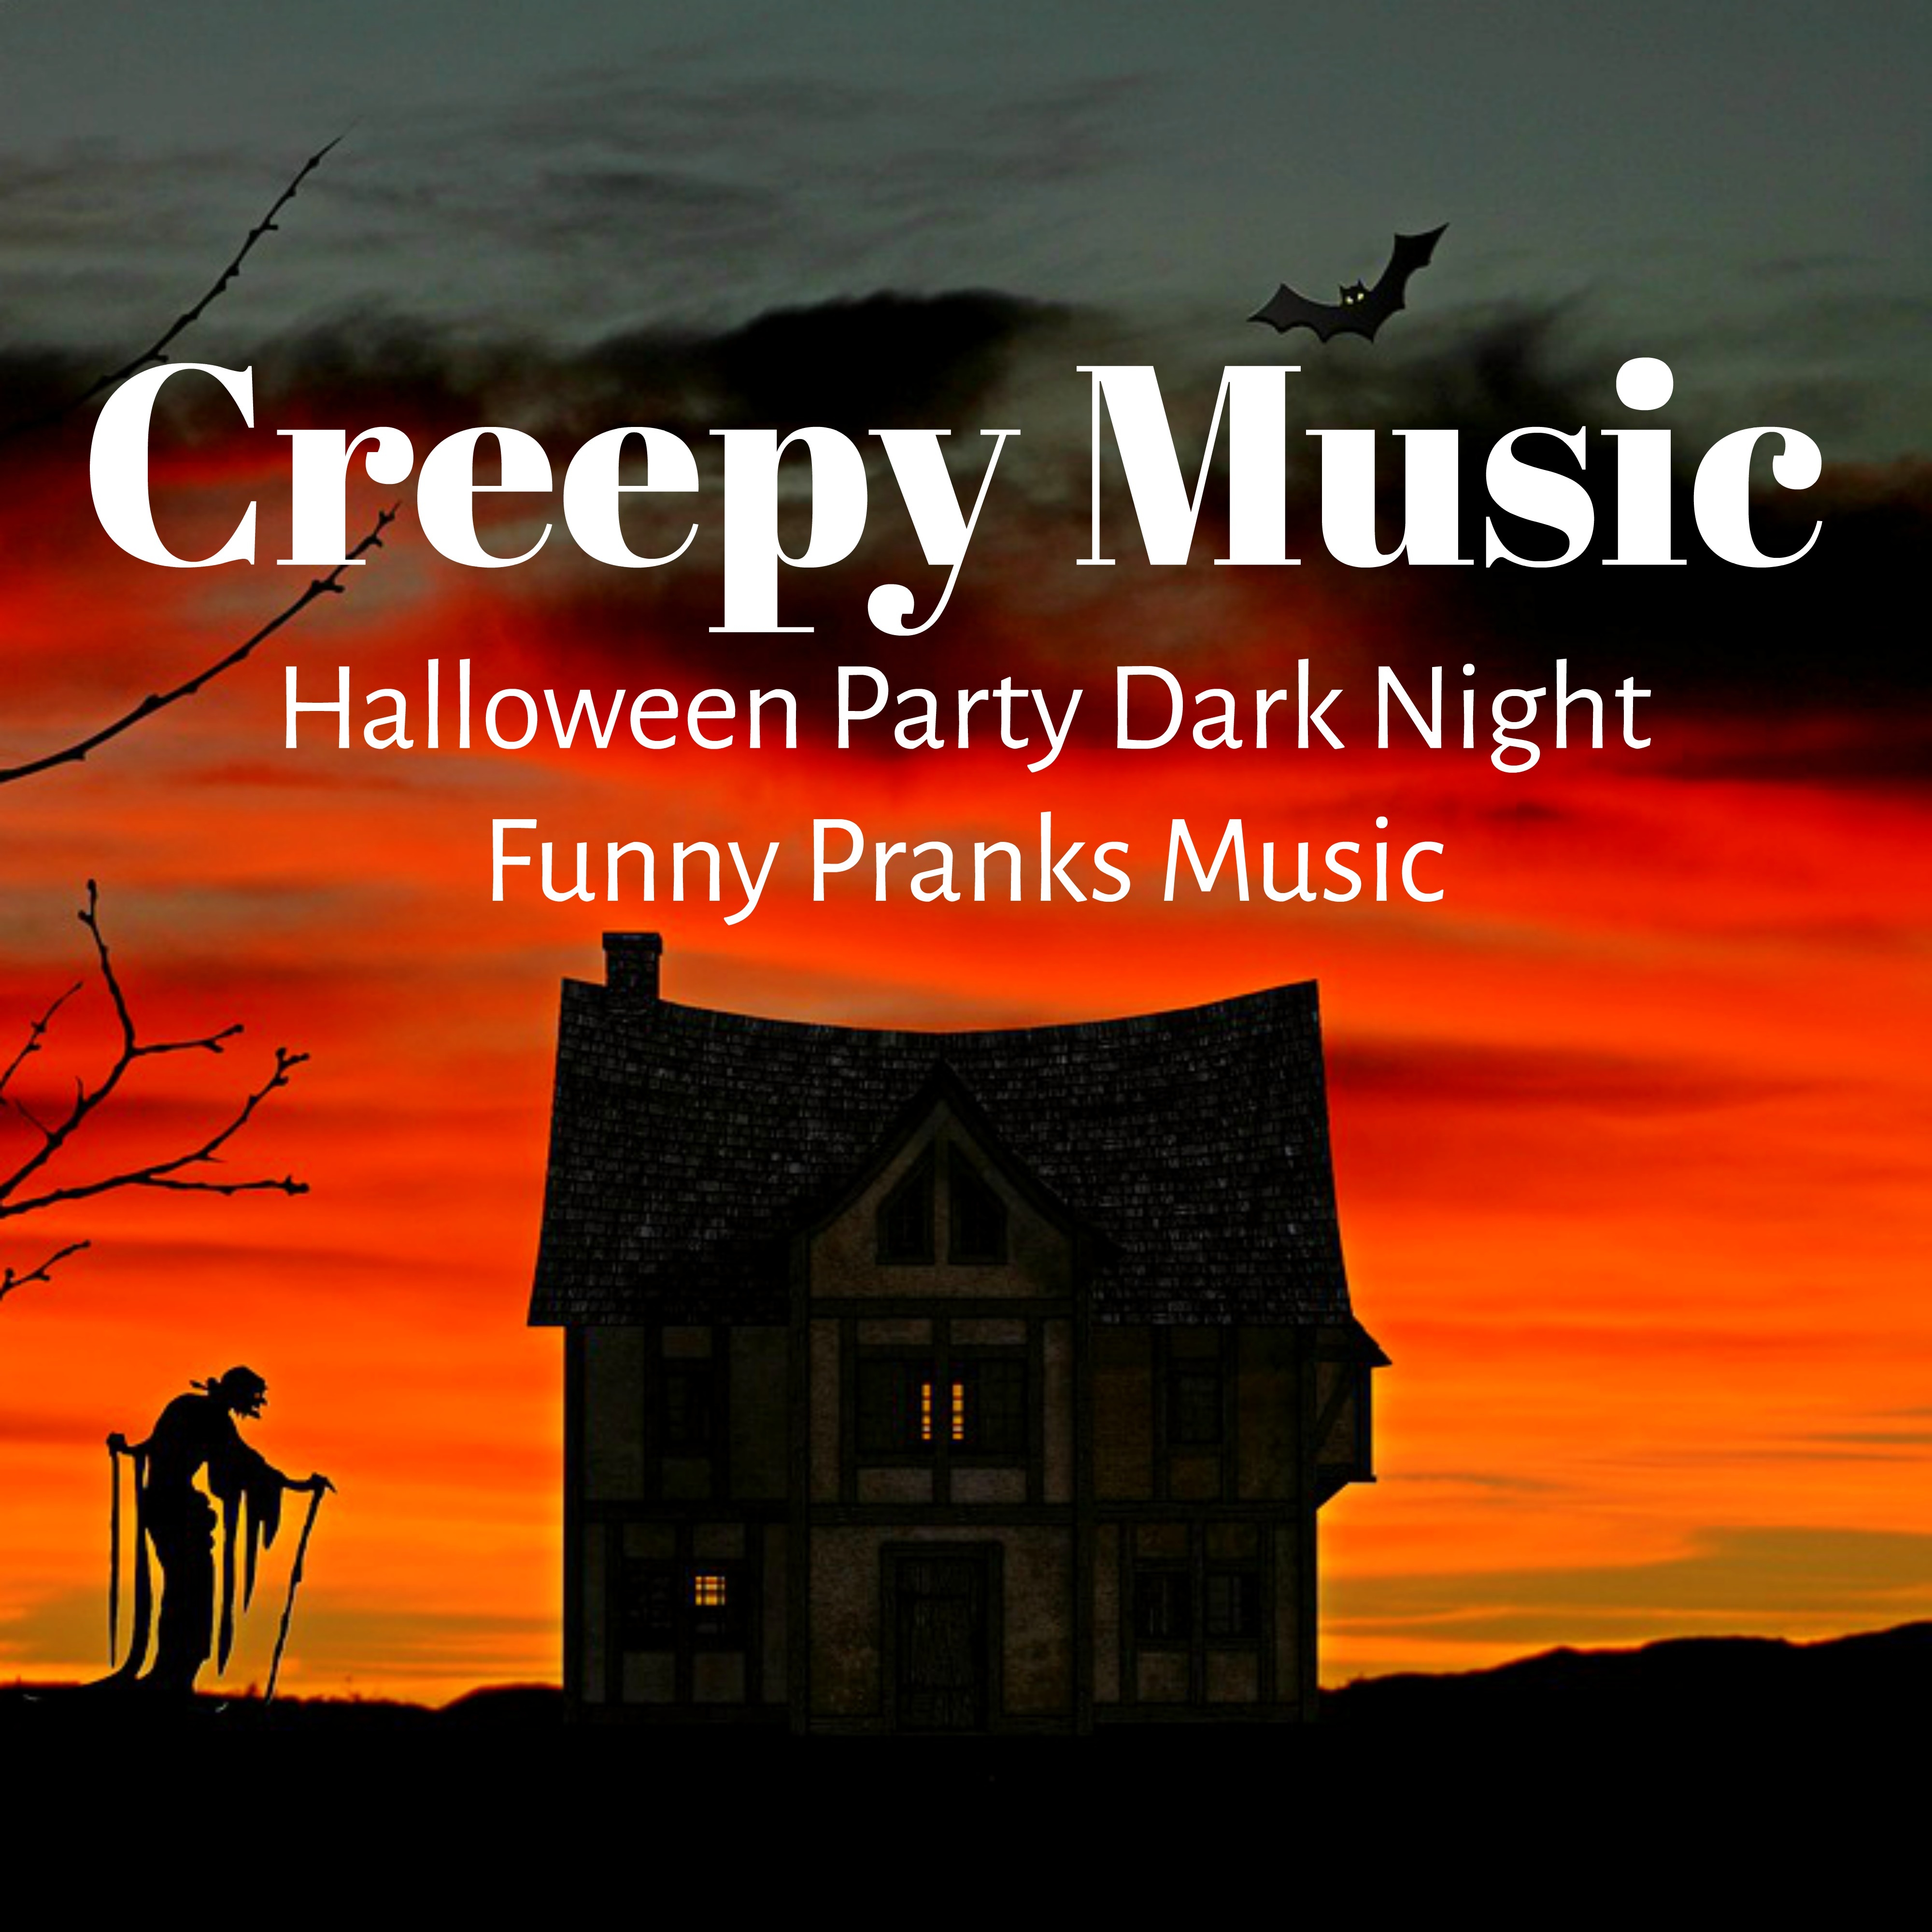 Creepy Music - Halloween Party Dark Night Funny Pranks with Horror Spooky Scary Sounds